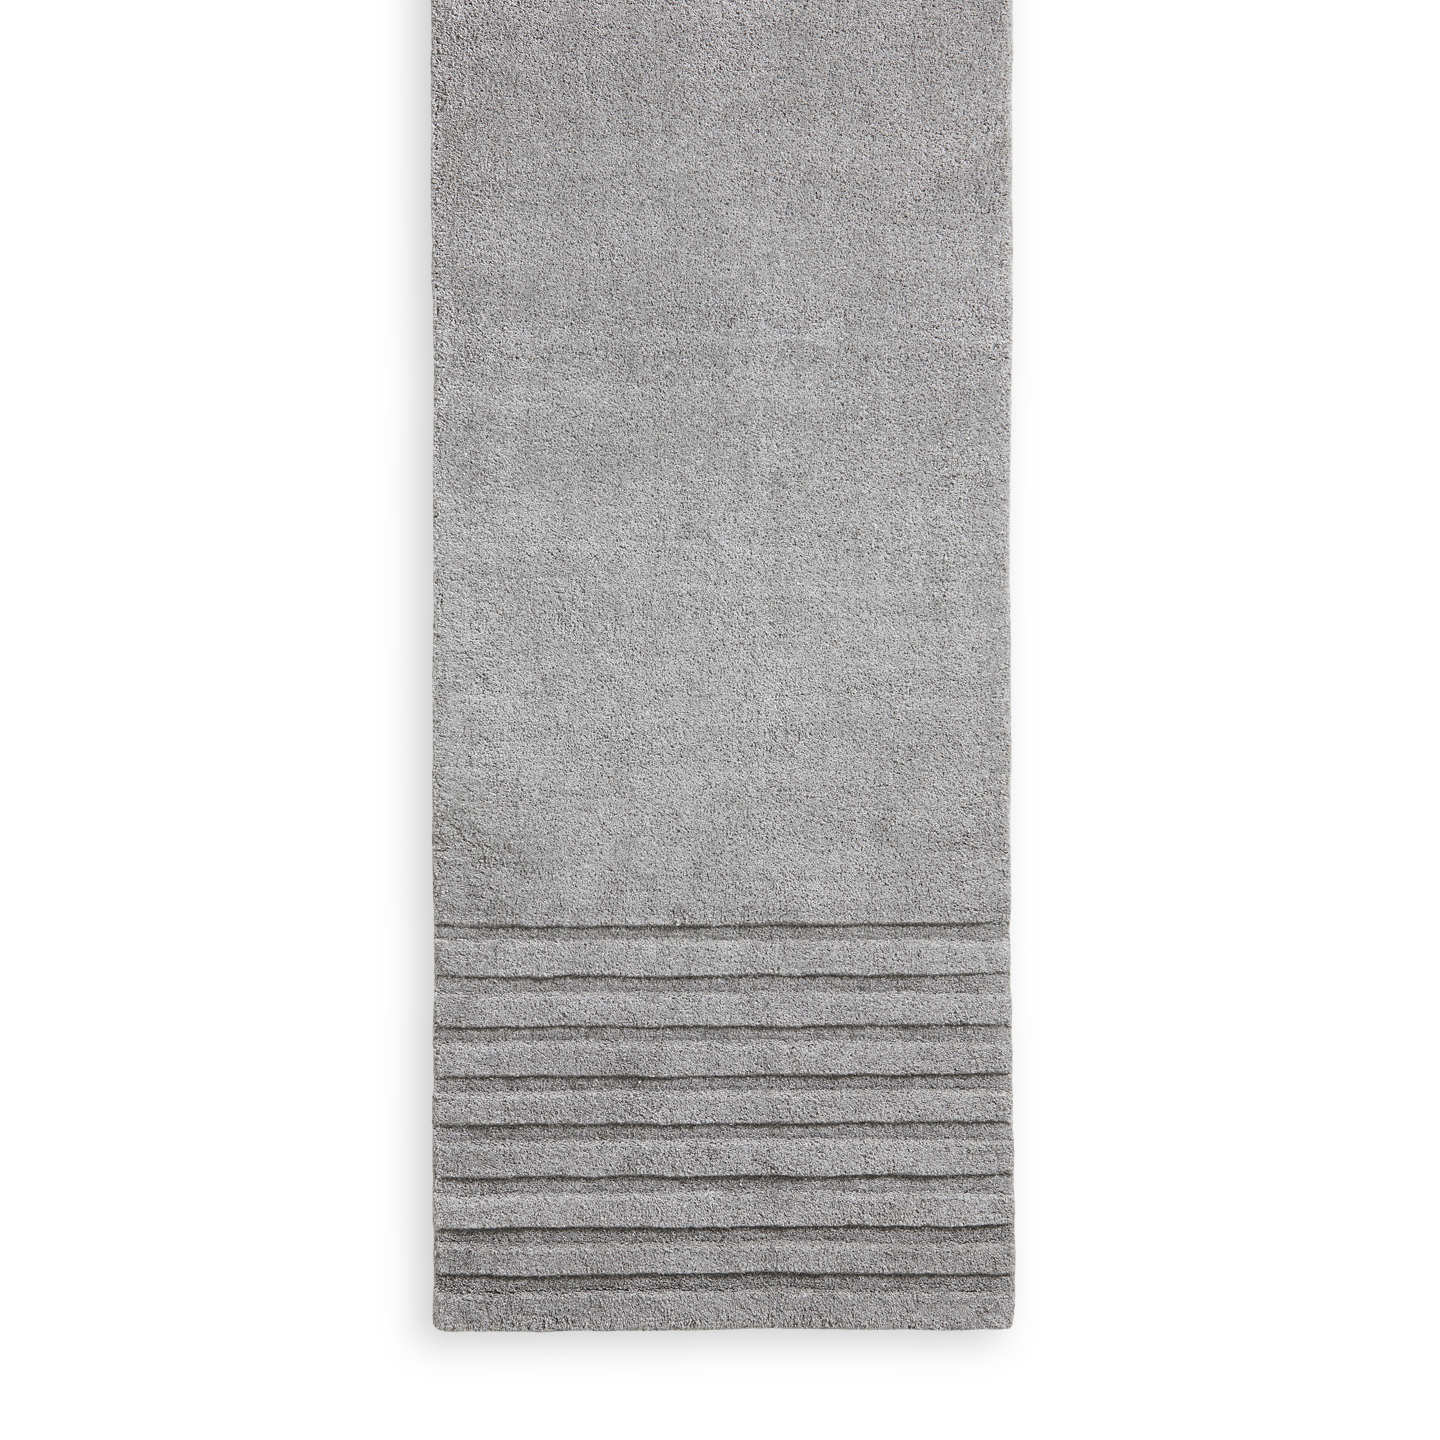 kyoto rug 80 x 200 cm grey by woud at adorn.house